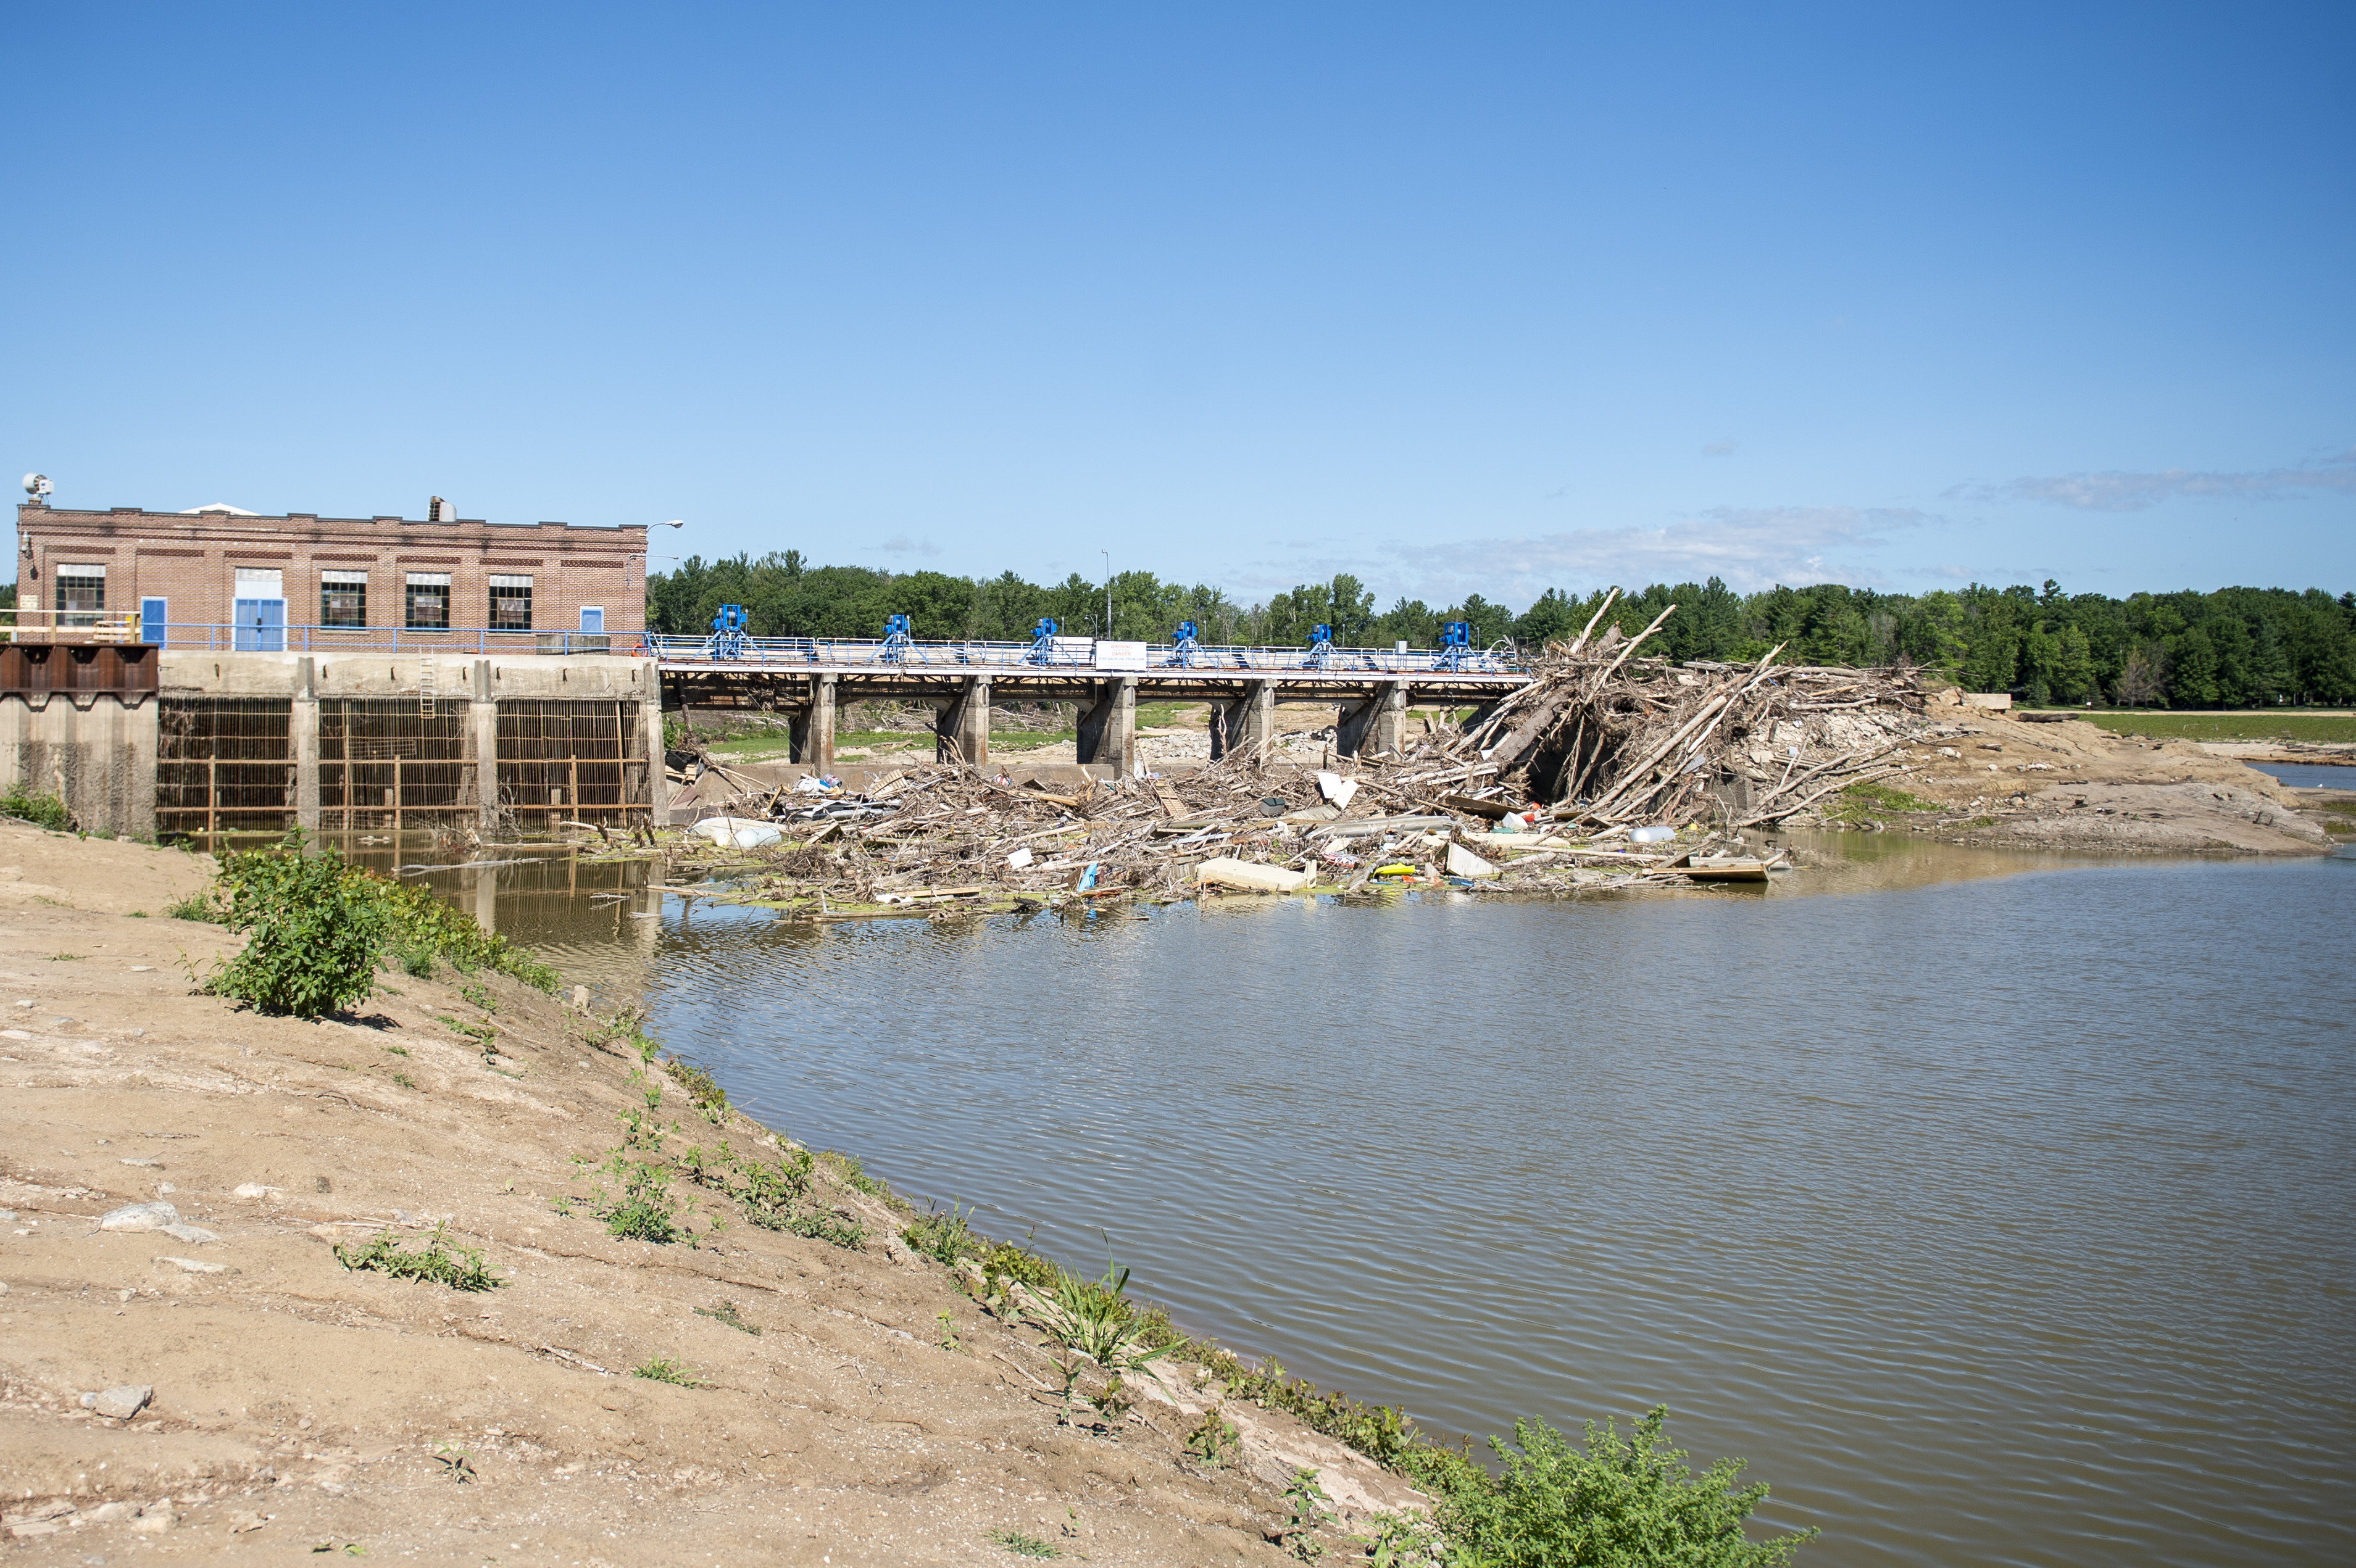 A view of the Sanford Dam in Sanford on Thursday, July 30, 2020. The devastating flood in May gushed over the majority of land in this area. (Kaytie Boomer | MLive.com)